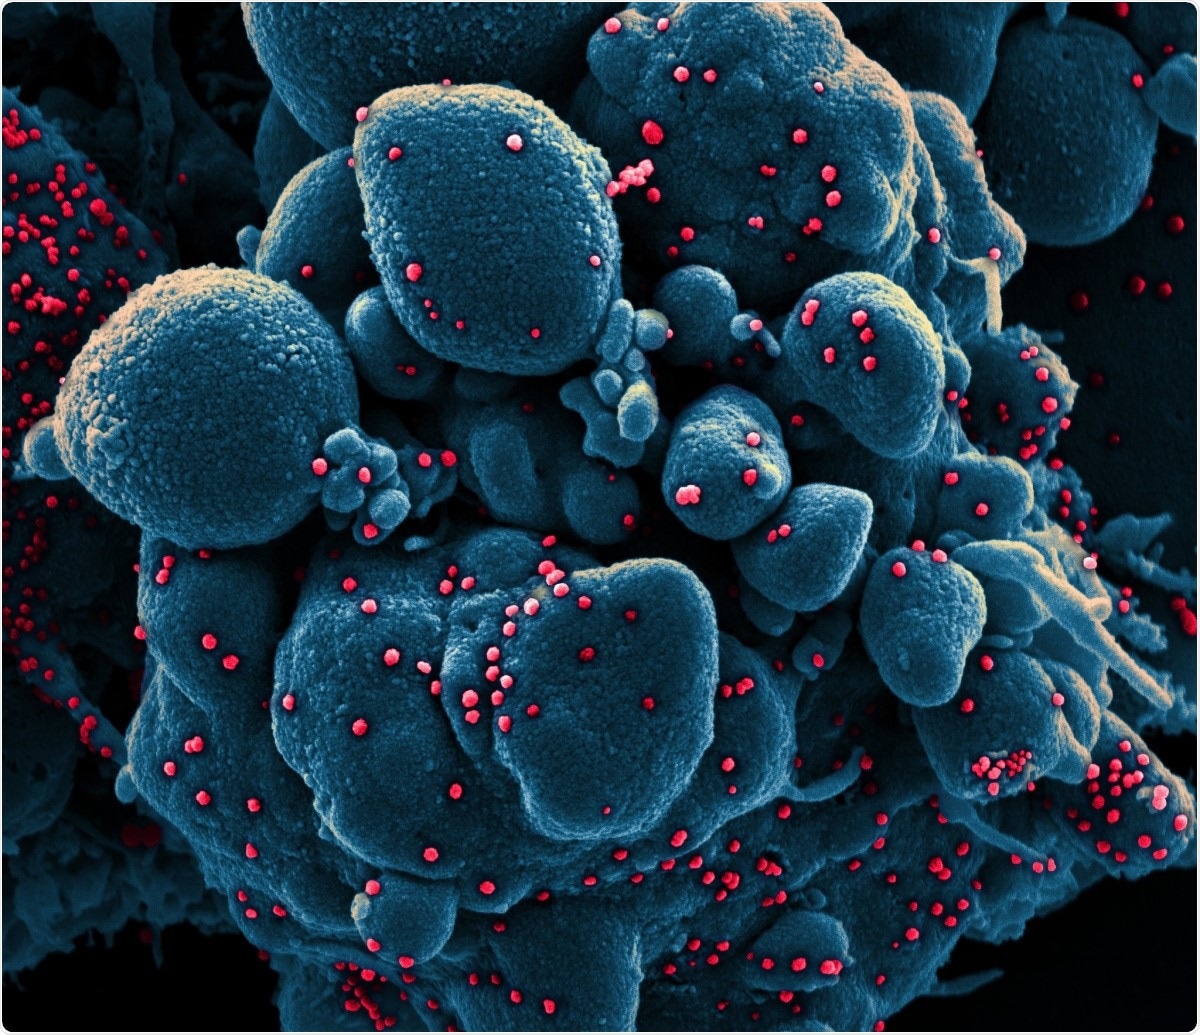 Novel Coronavirus SARS-CoV-2 Colorized scanning electron micrograph of an apoptotic cell (blue) infected with SARS-COV-2 virus particles (red), isolated from a patient sample. Image captured at the NIAID Integrated Research Facility (IRF) in Fort Detrick, Maryland. Image Credit: NIAID / Flickr